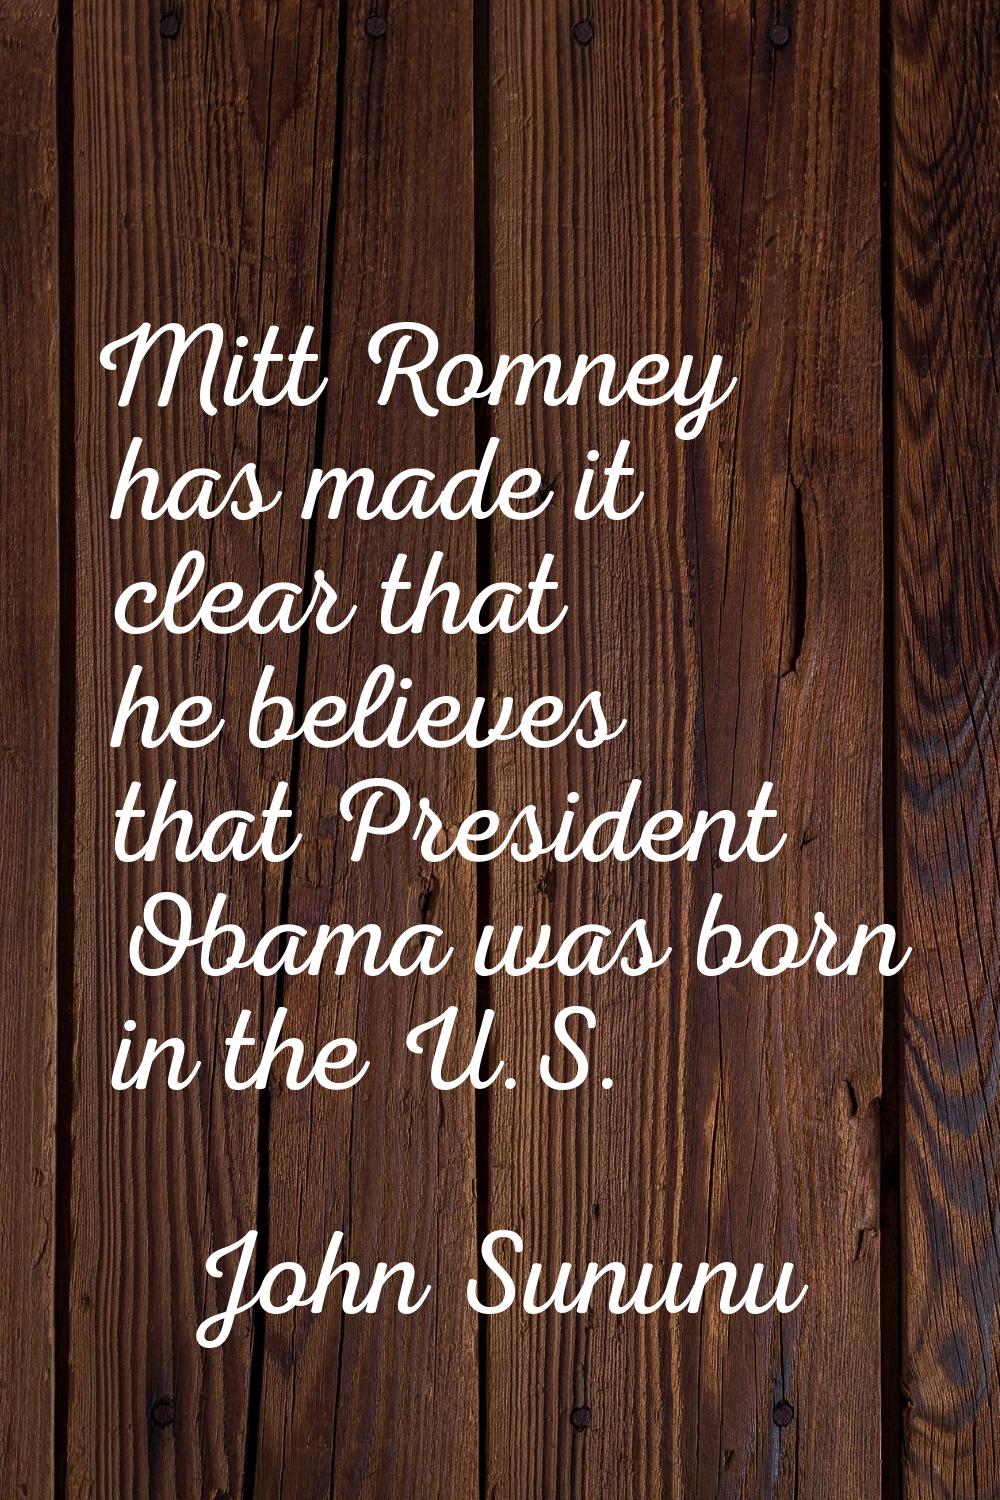 Mitt Romney has made it clear that he believes that President Obama was born in the U.S.